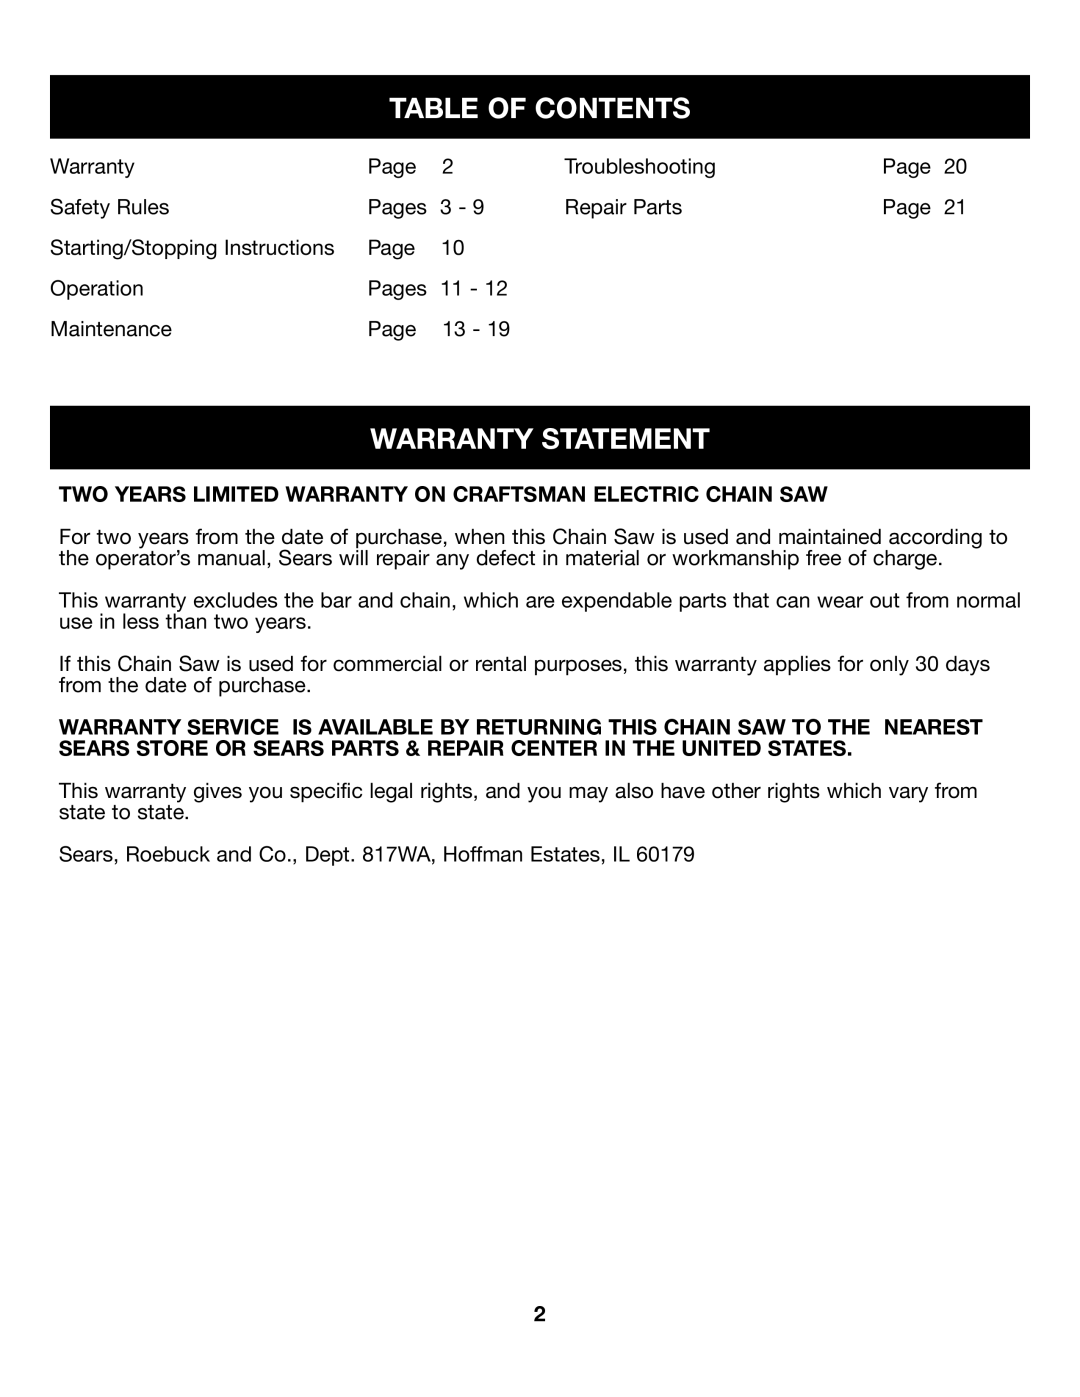 Craftsman 316.34107 Table Of Contents, Warranty Statement, Two Years Limited Warranty On Craftsman Electric Chain Saw 